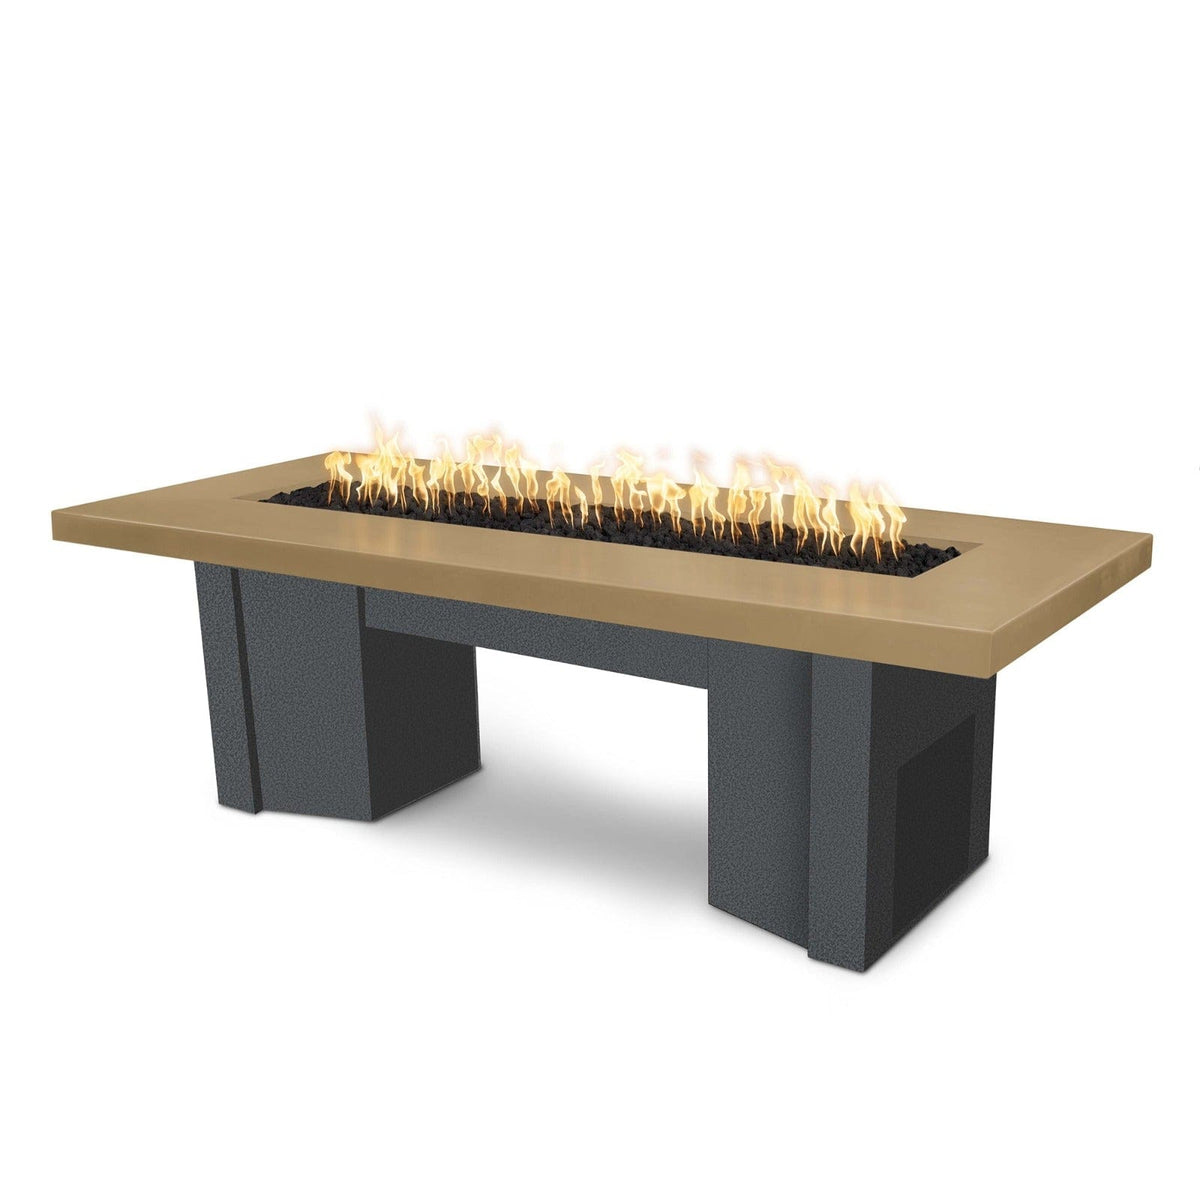 The Outdoor Plus Fire Features Brown (-BRN) / Silver Vein Powder Coated Steel (-SLV) The Outdoor Plus 78&quot; Alameda Fire Table Smooth Concrete in Liquid Propane - Match Lit with Flame Sense System / OPT-ALMGFRC78FSML-LP